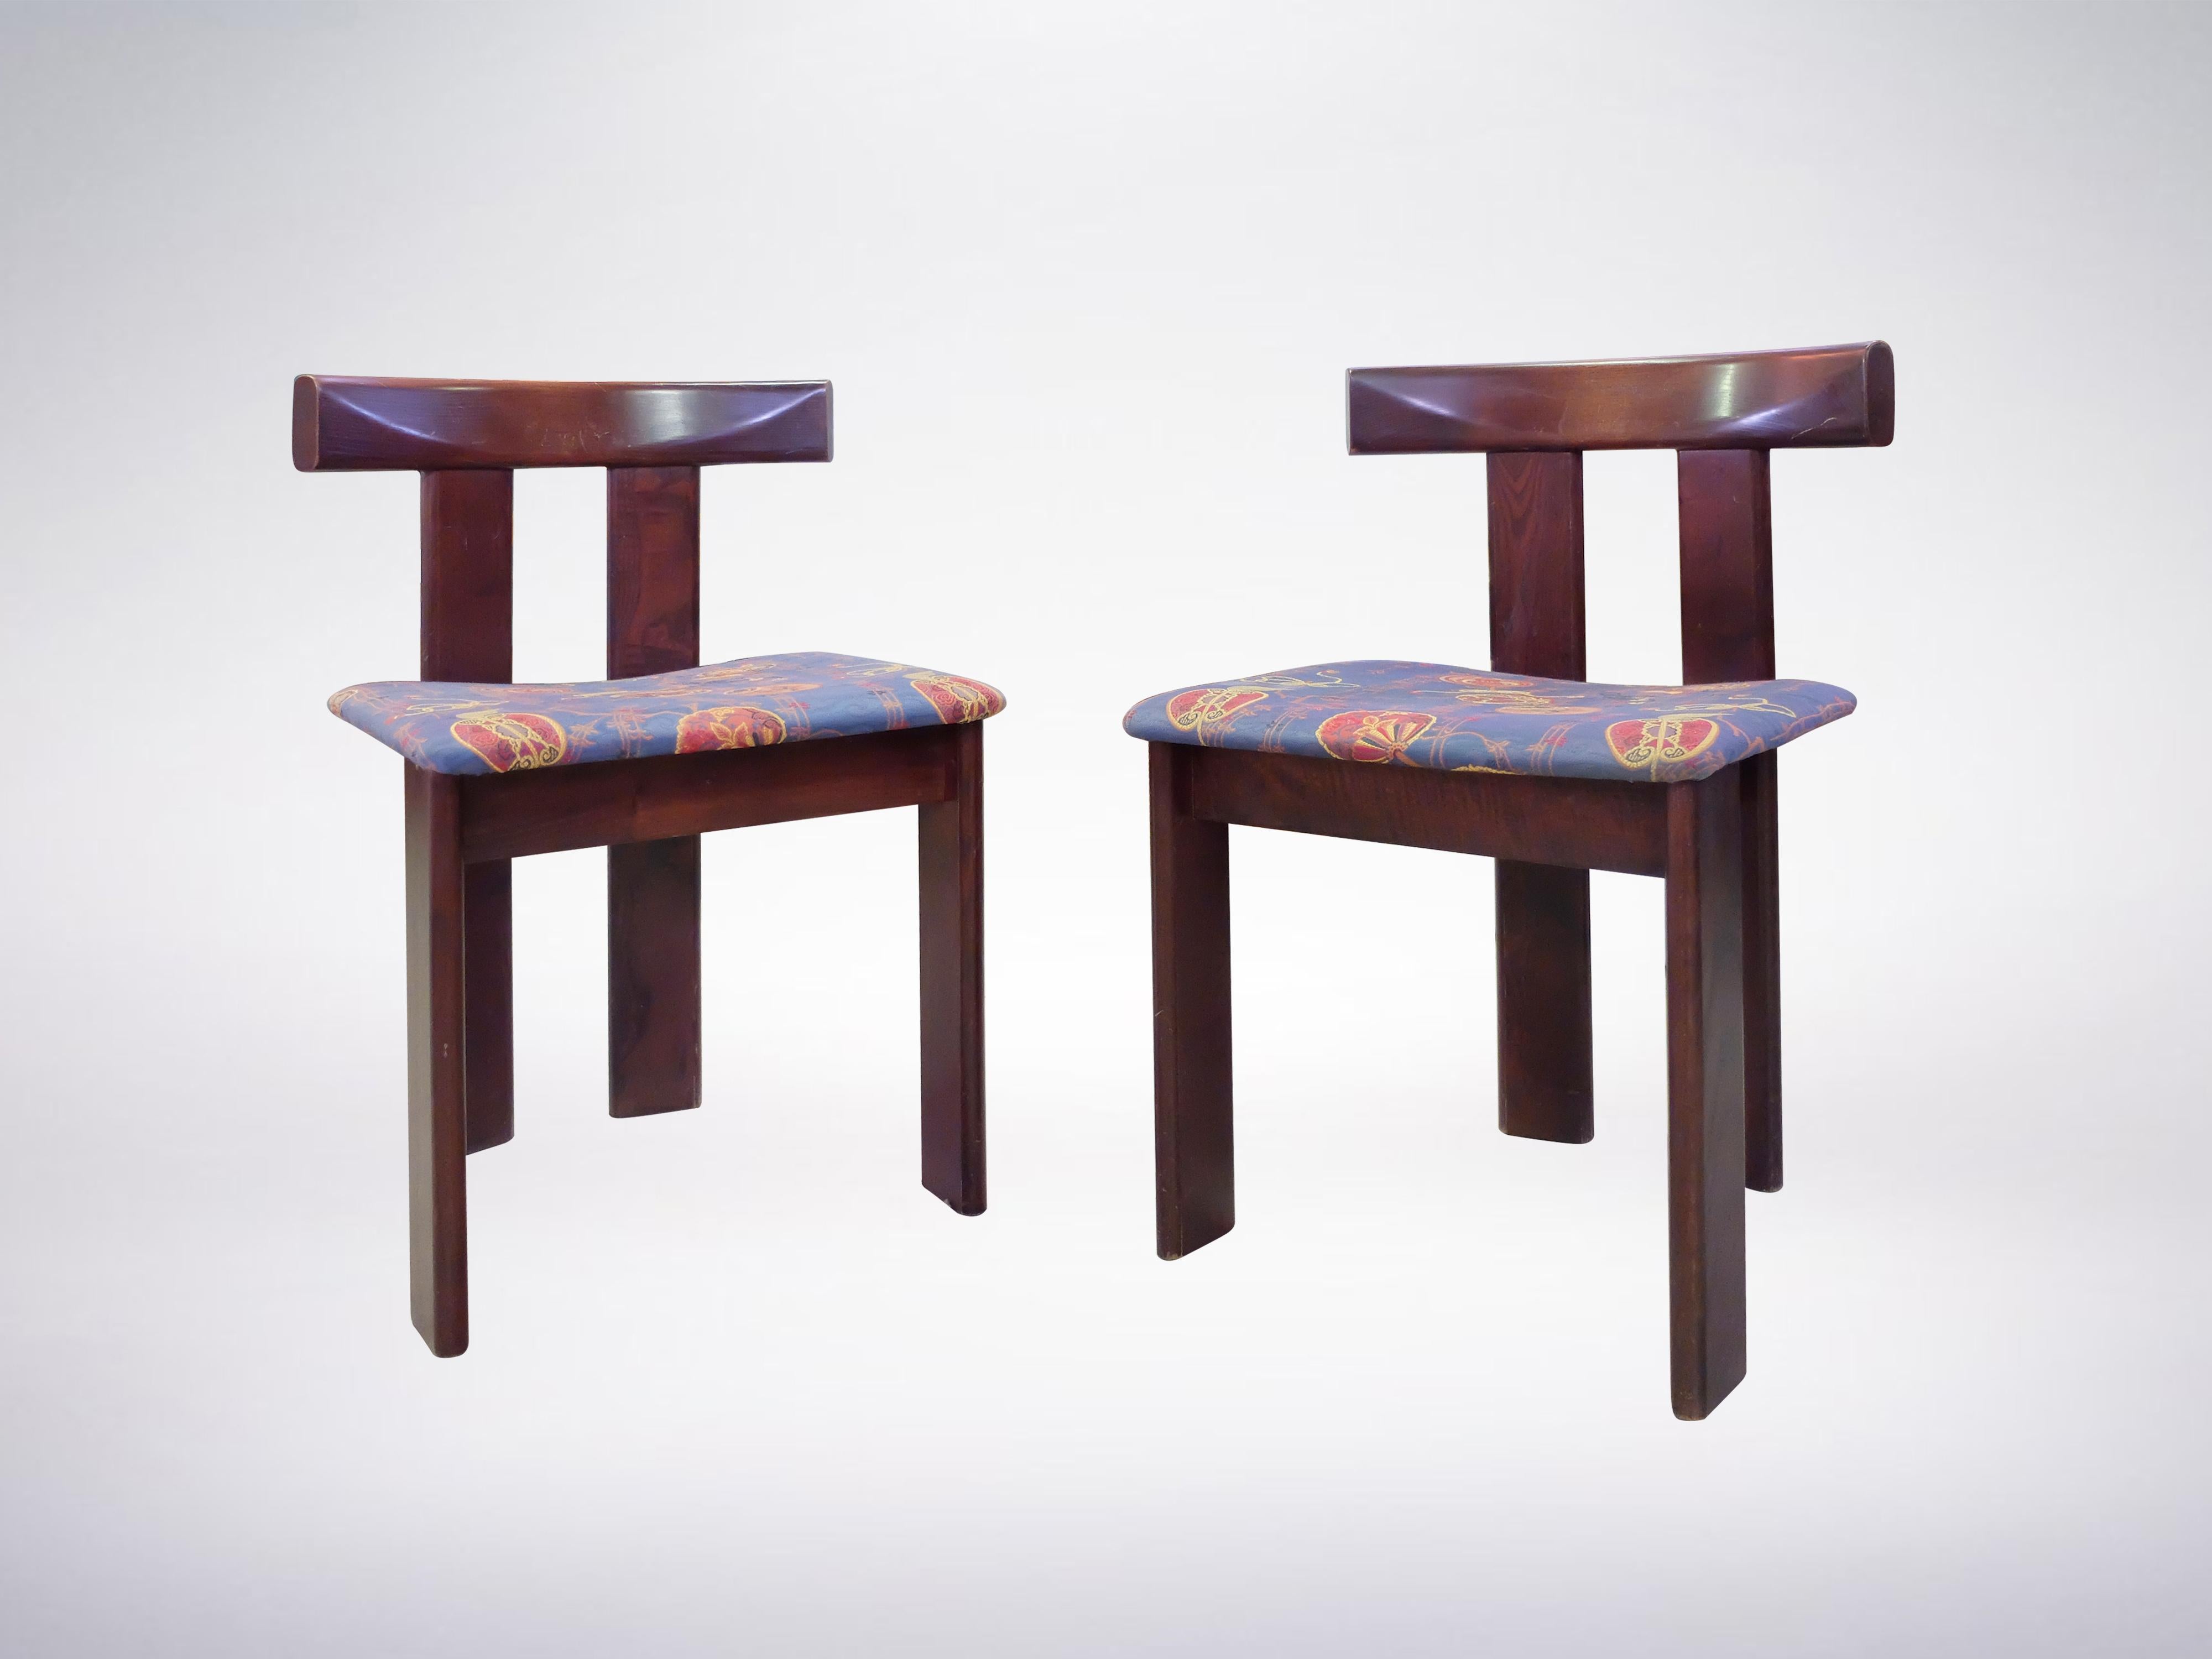 Vico Magistretti
Set of six wooden chairs
1950s



Please note : the 